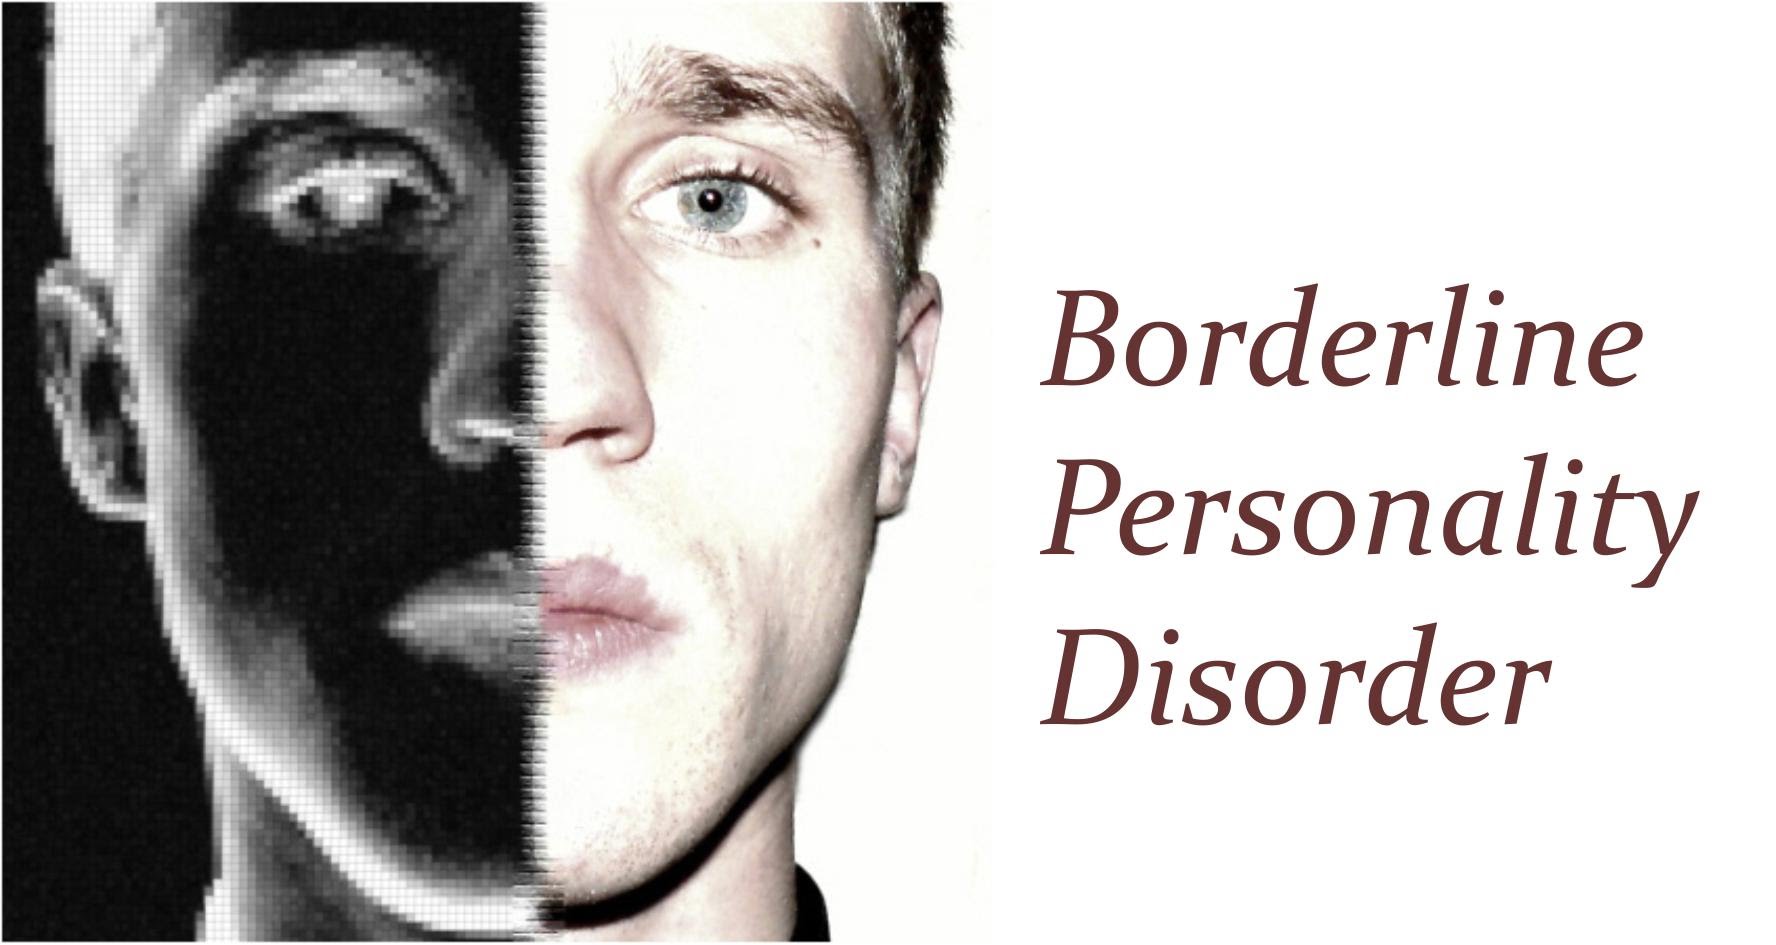 What Is Borderline Personality Disorder? - Natural Treatment